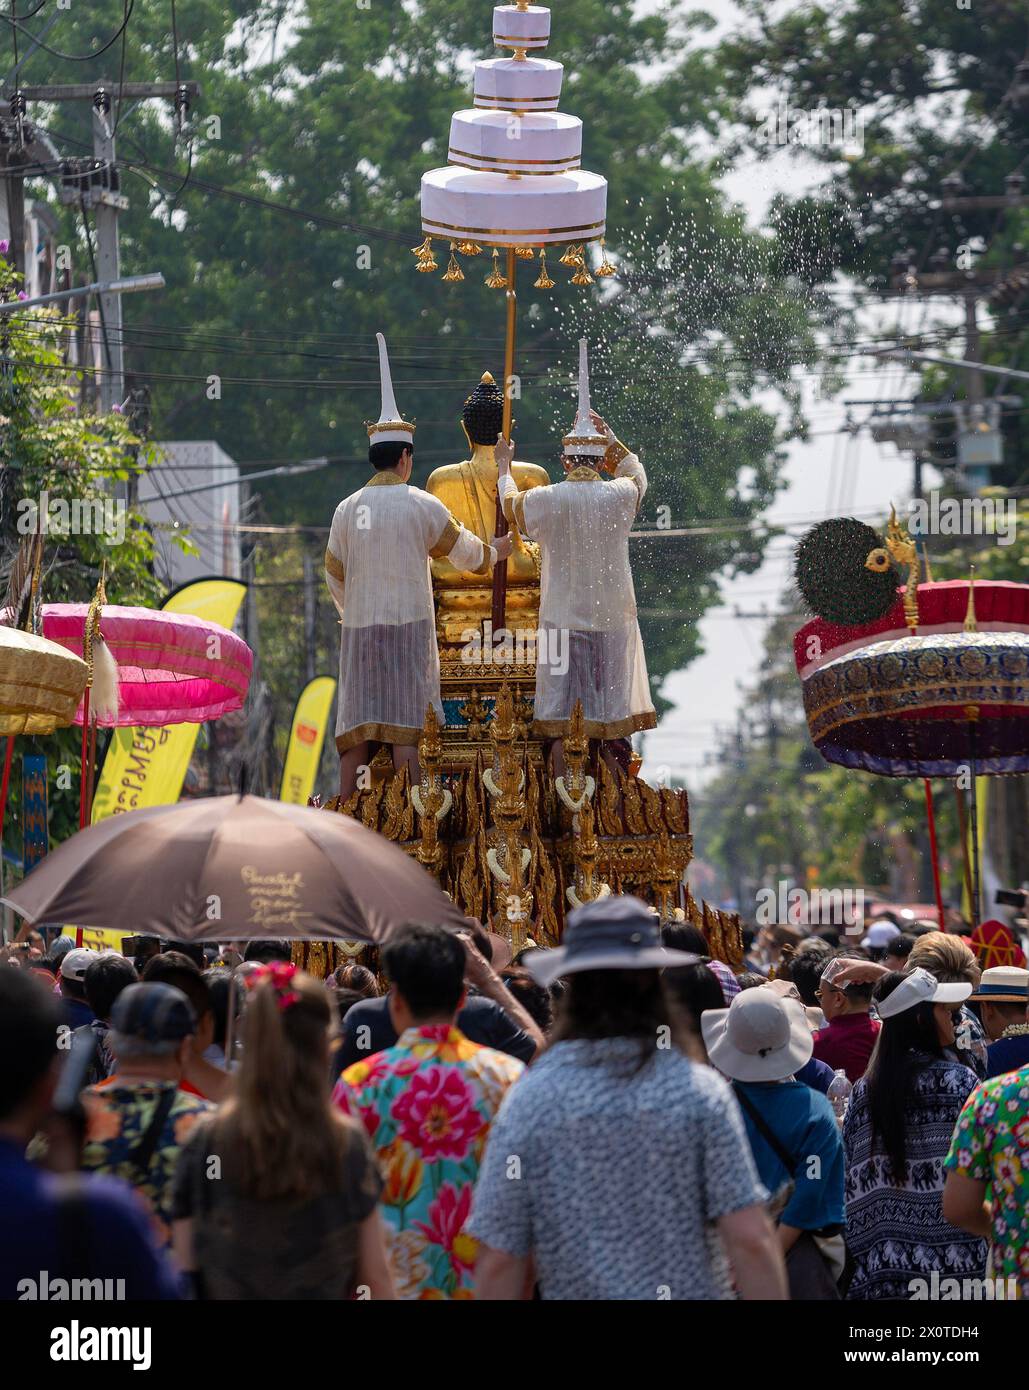 Thai people wearing traditional costumes seen during The Phra Buddha Sihing Buddha statue procession to mark Songkran celebrations at Wat Phra Singh Woramahaviharn temple. The festive Songkran is also known as the water festival which is celebrated on the Thai traditional New Year's day annually on 13 April by spraying water and throwing powder at each others faces as a symbolic sign of cleansing and washing away the sins from the past year. Stock Photo